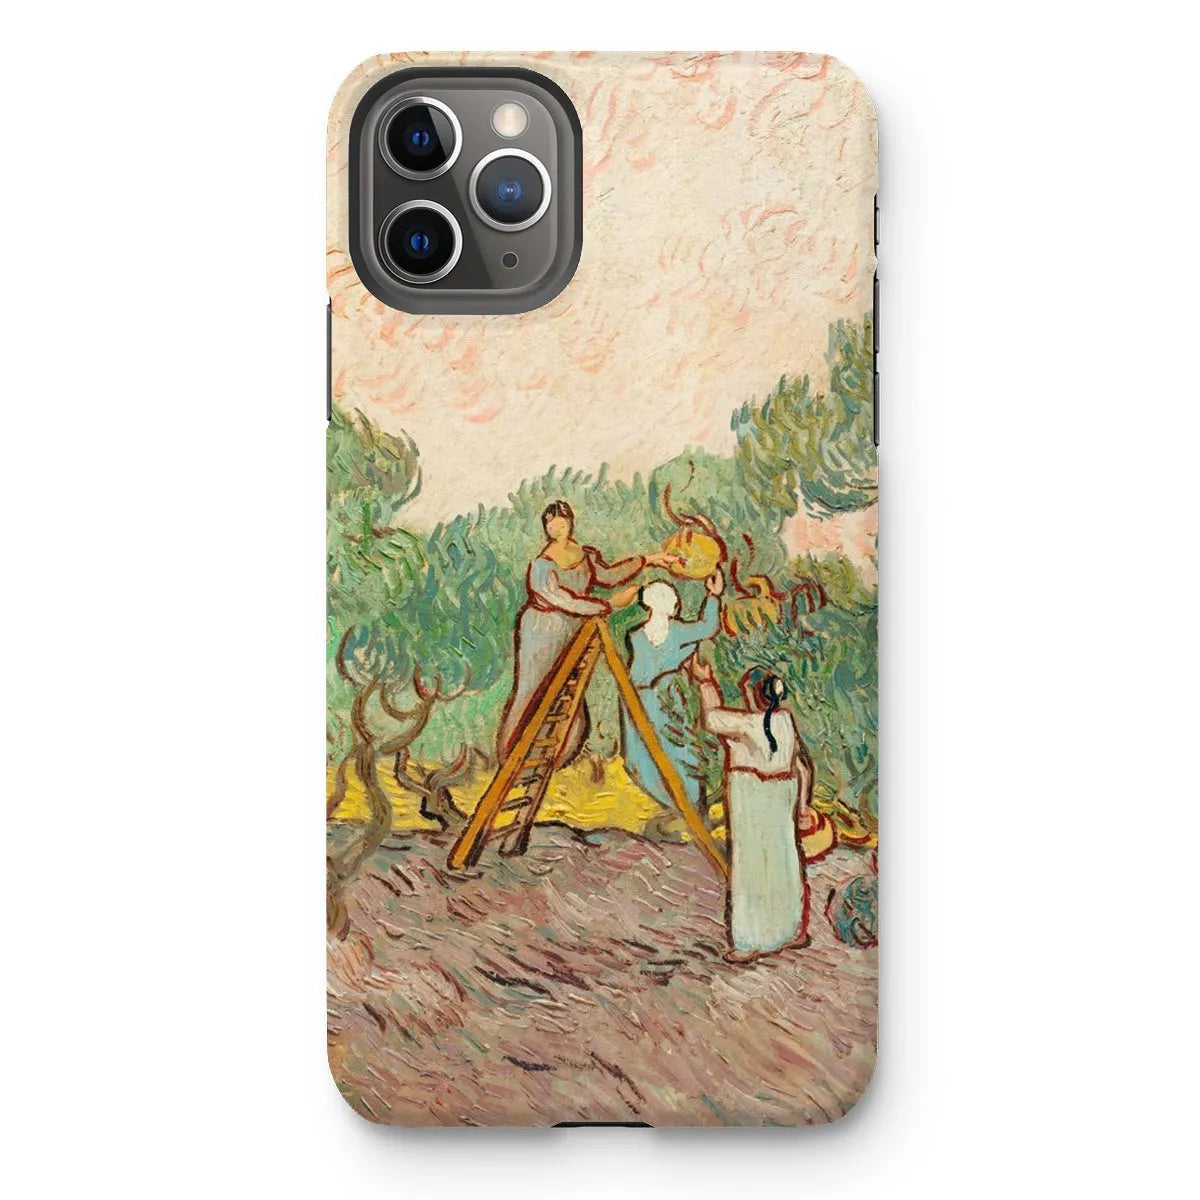 Women Picking Olives - Art Phone Case - Vincent Van Gogh - Iphone 11 Pro Max / Matte - Mobile Phone Cases - Aesthetic